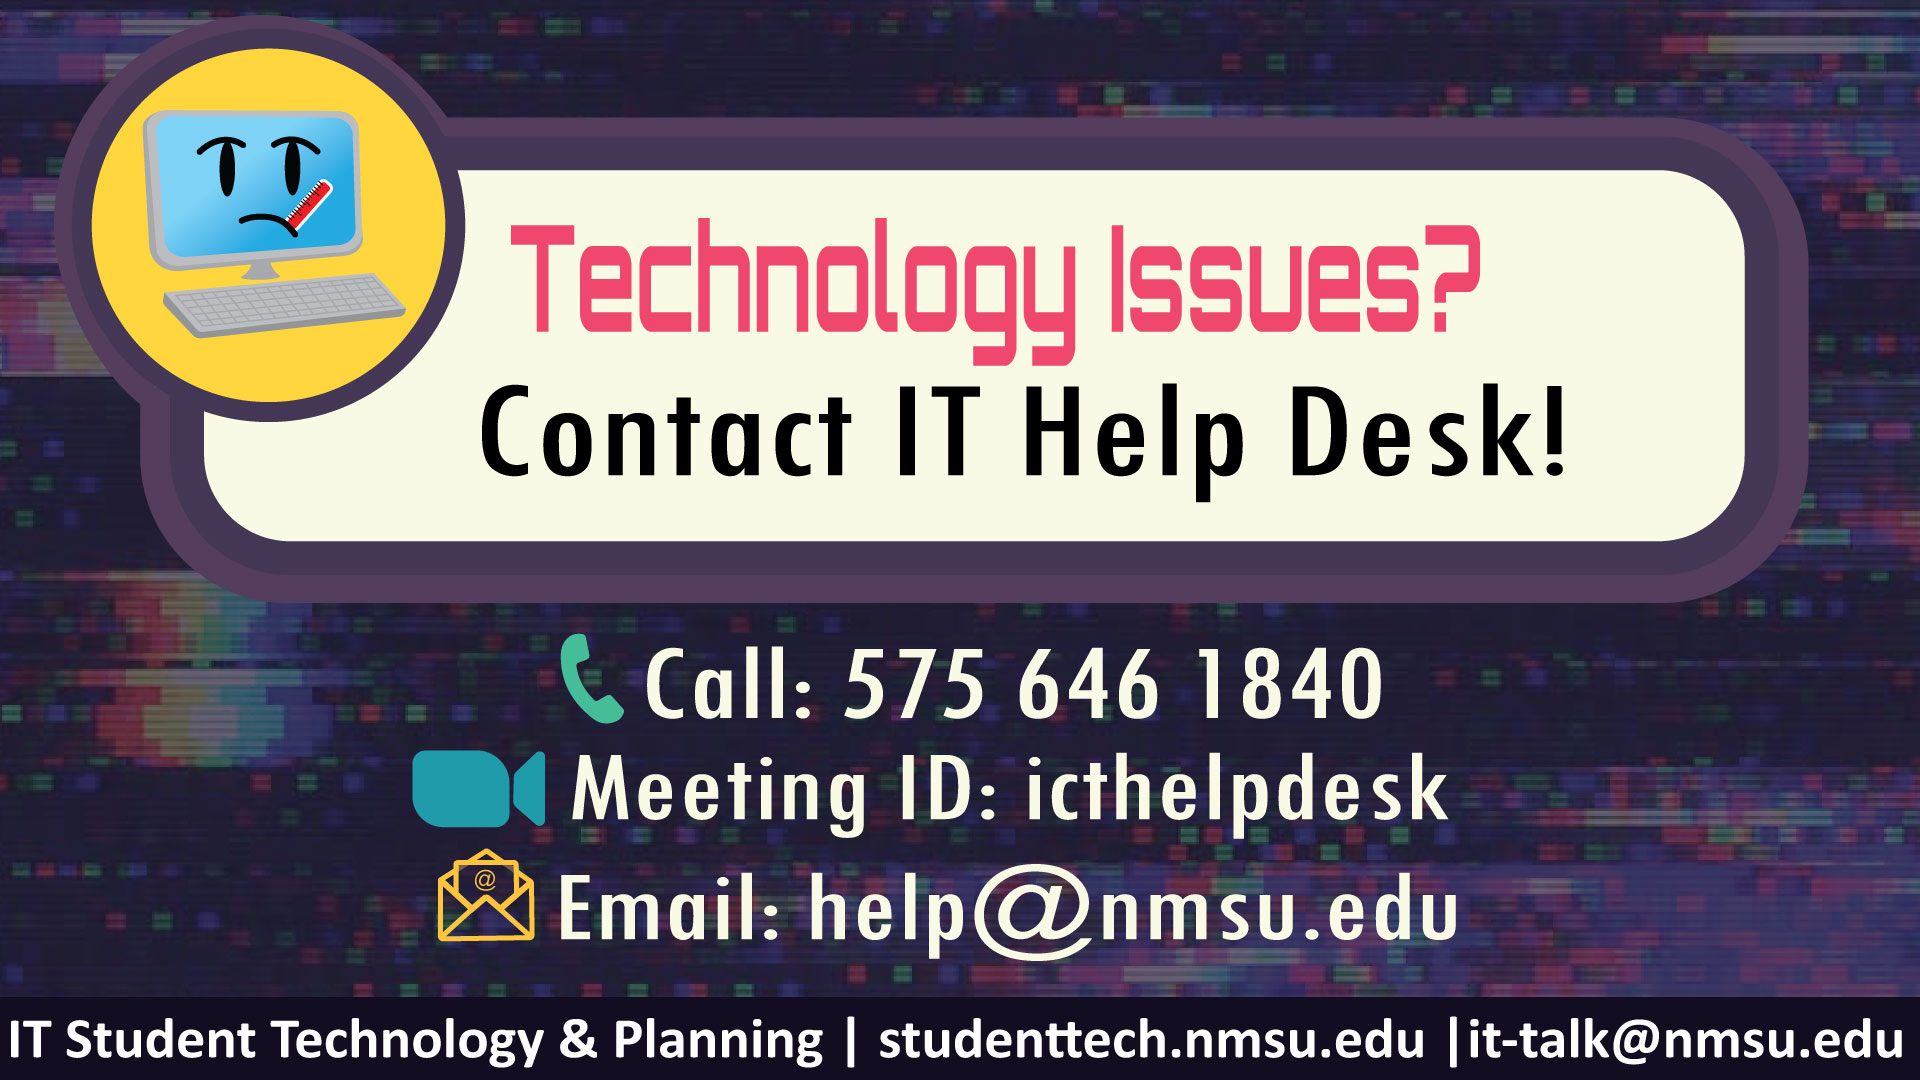 Technology issues? Contact IT Help Desk! Call: 575-646-1840. Zoom Meeting ID: icthelpdesk. Email: help@nmsu.edu.